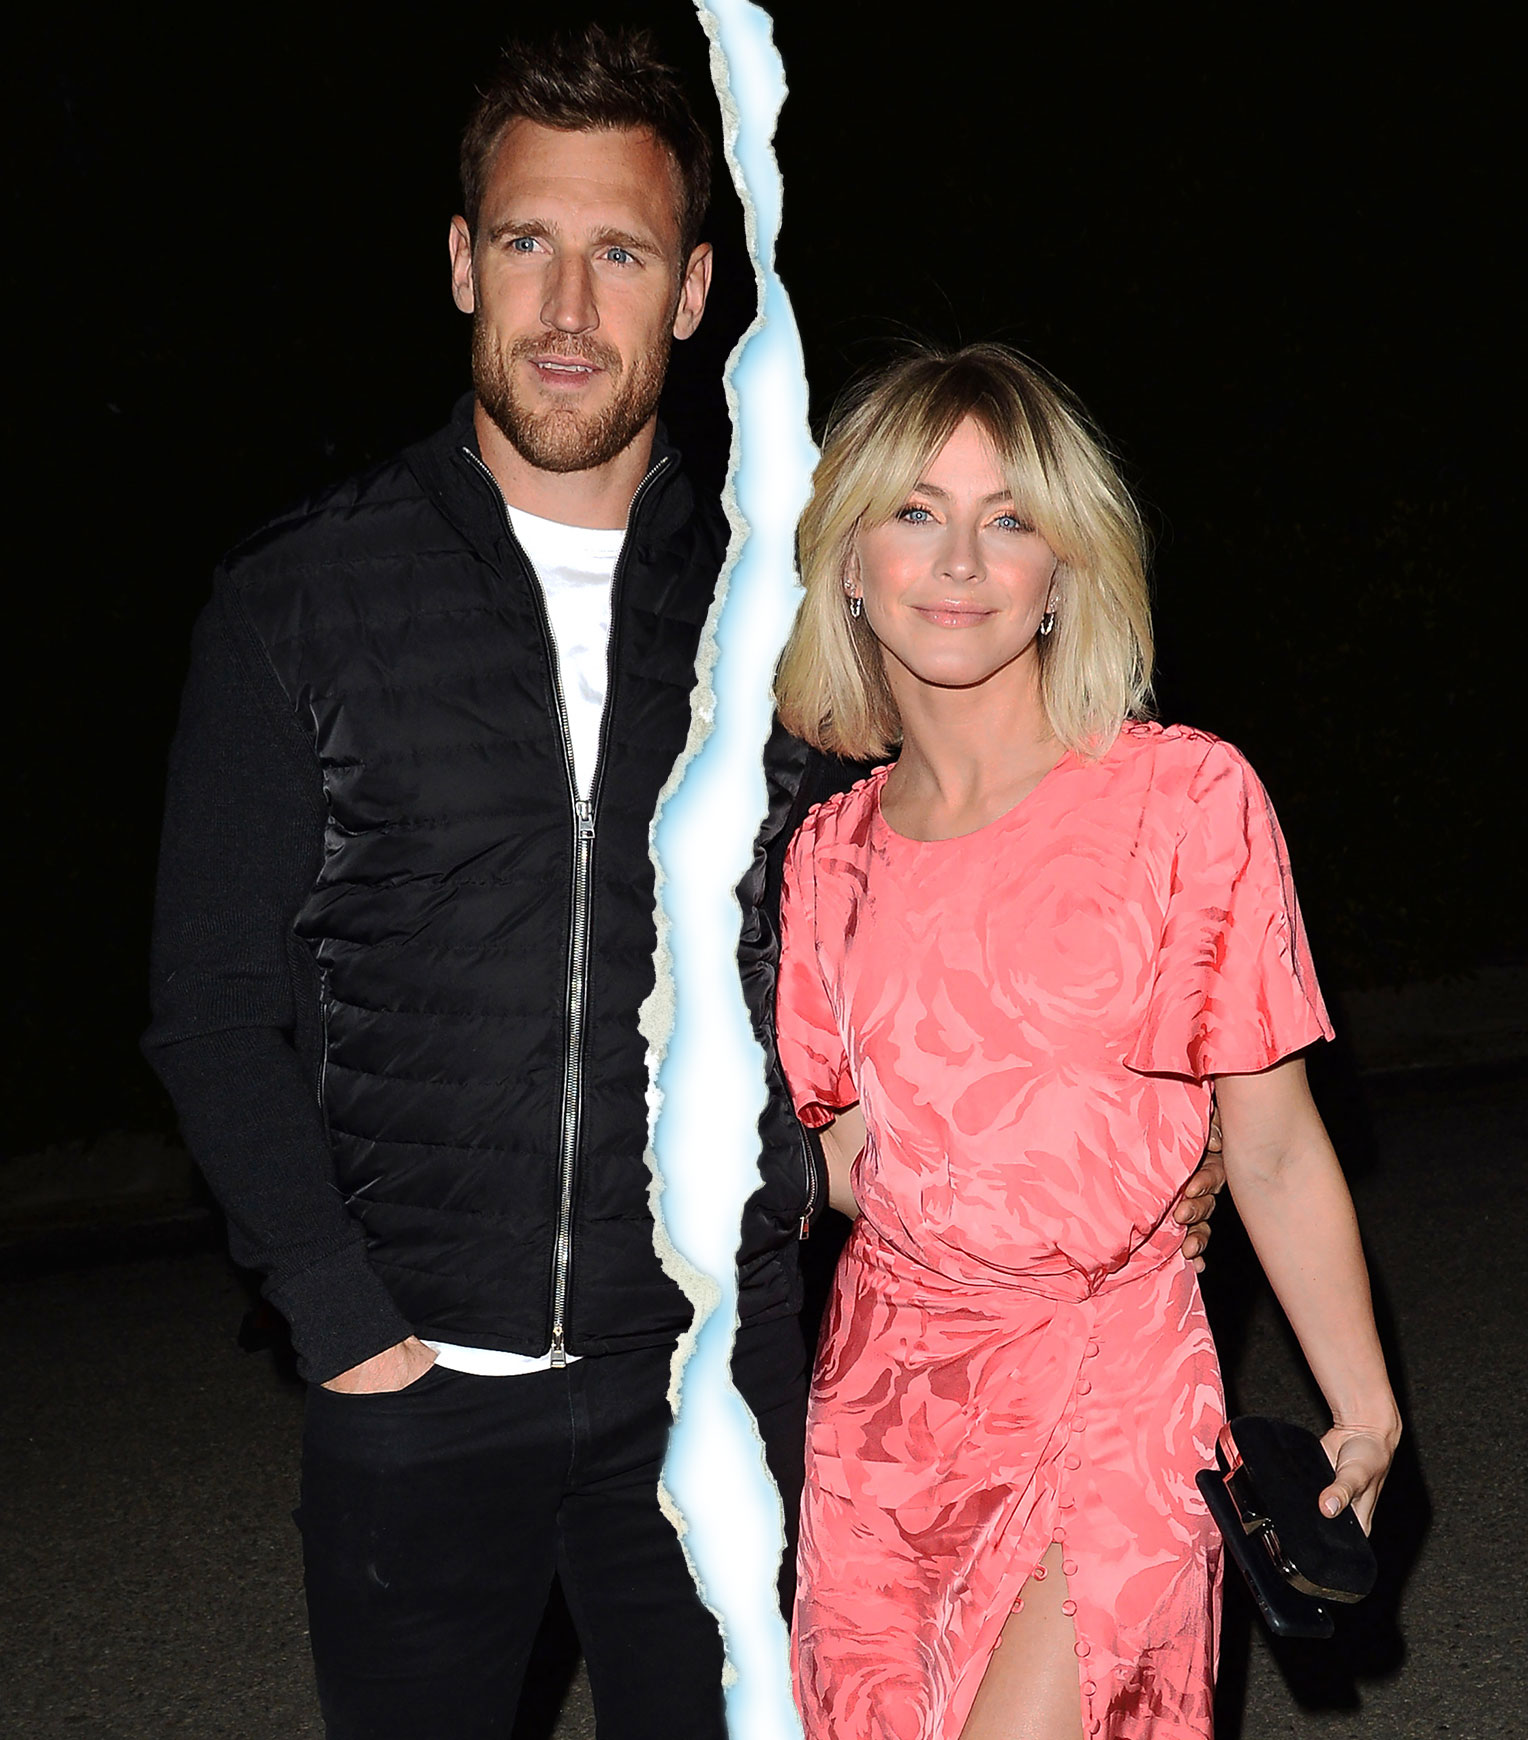 Julianne Hough and Brooks Laich announce separation after nearly 3 years of  marriage